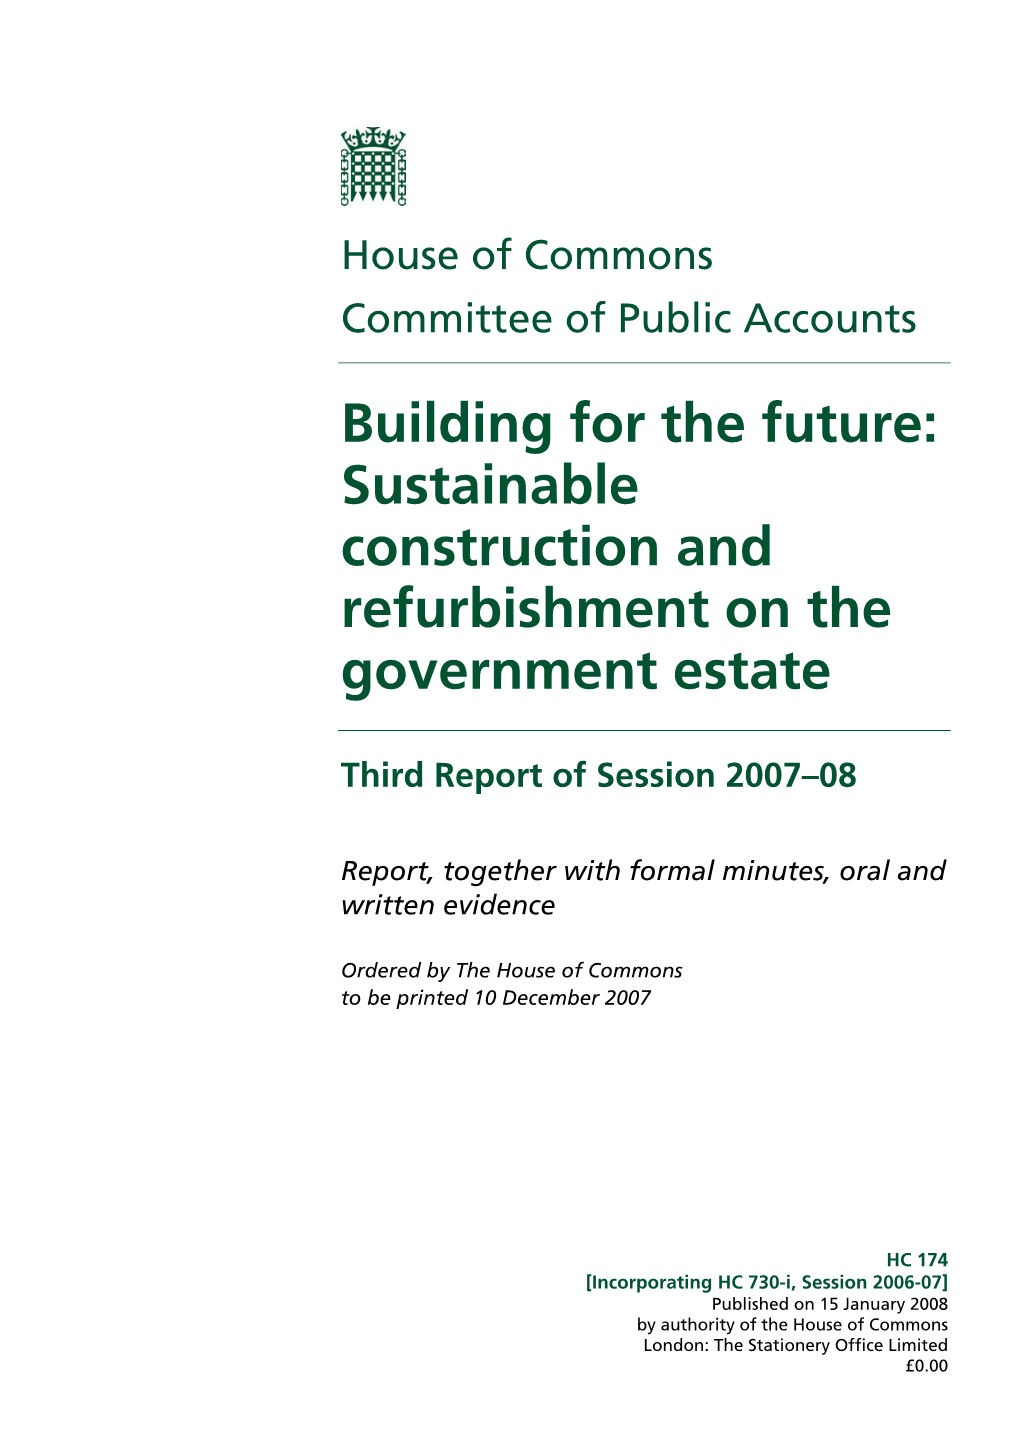 Sustainable Construction and Refurbishment on the Government Estate